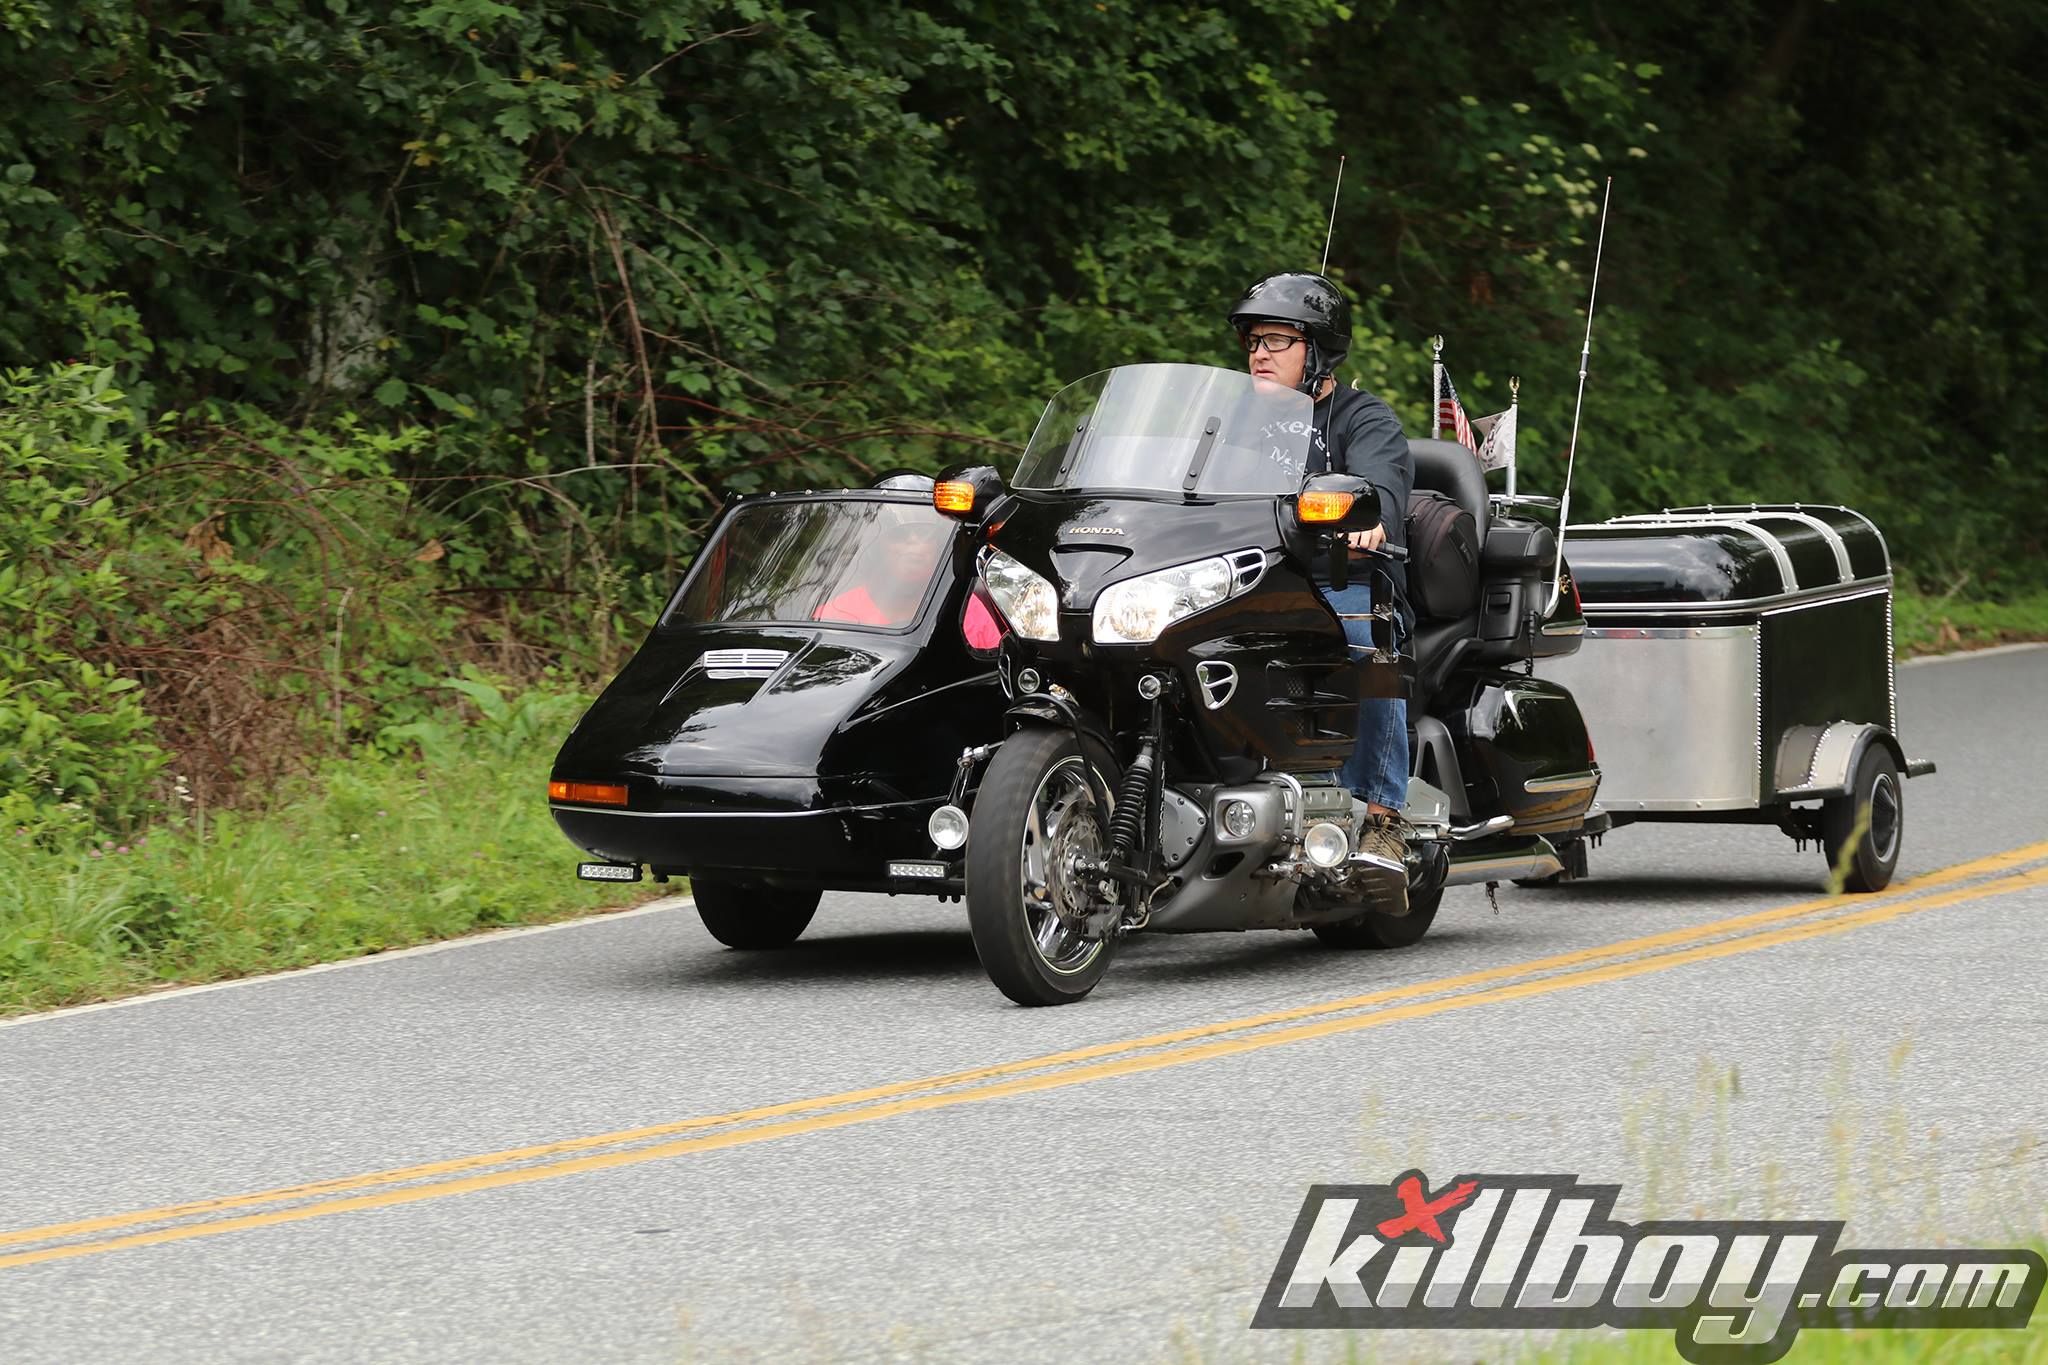 When your motorcycle takes up more space than a convertible.